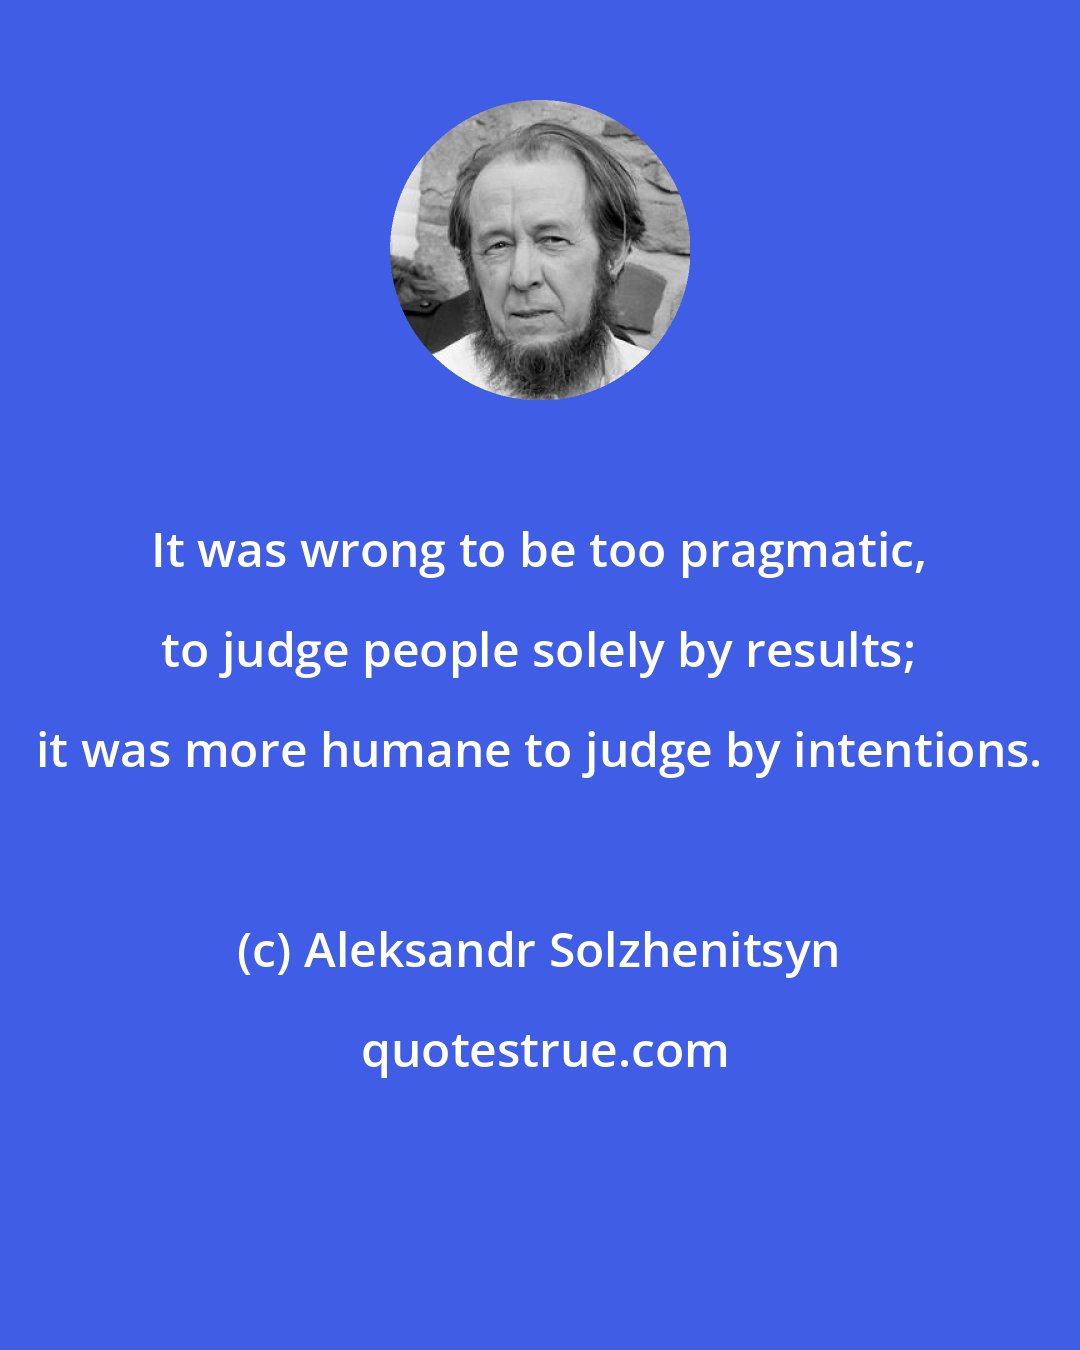 Aleksandr Solzhenitsyn: It was wrong to be too pragmatic, to judge people solely by results; it was more humane to judge by intentions.